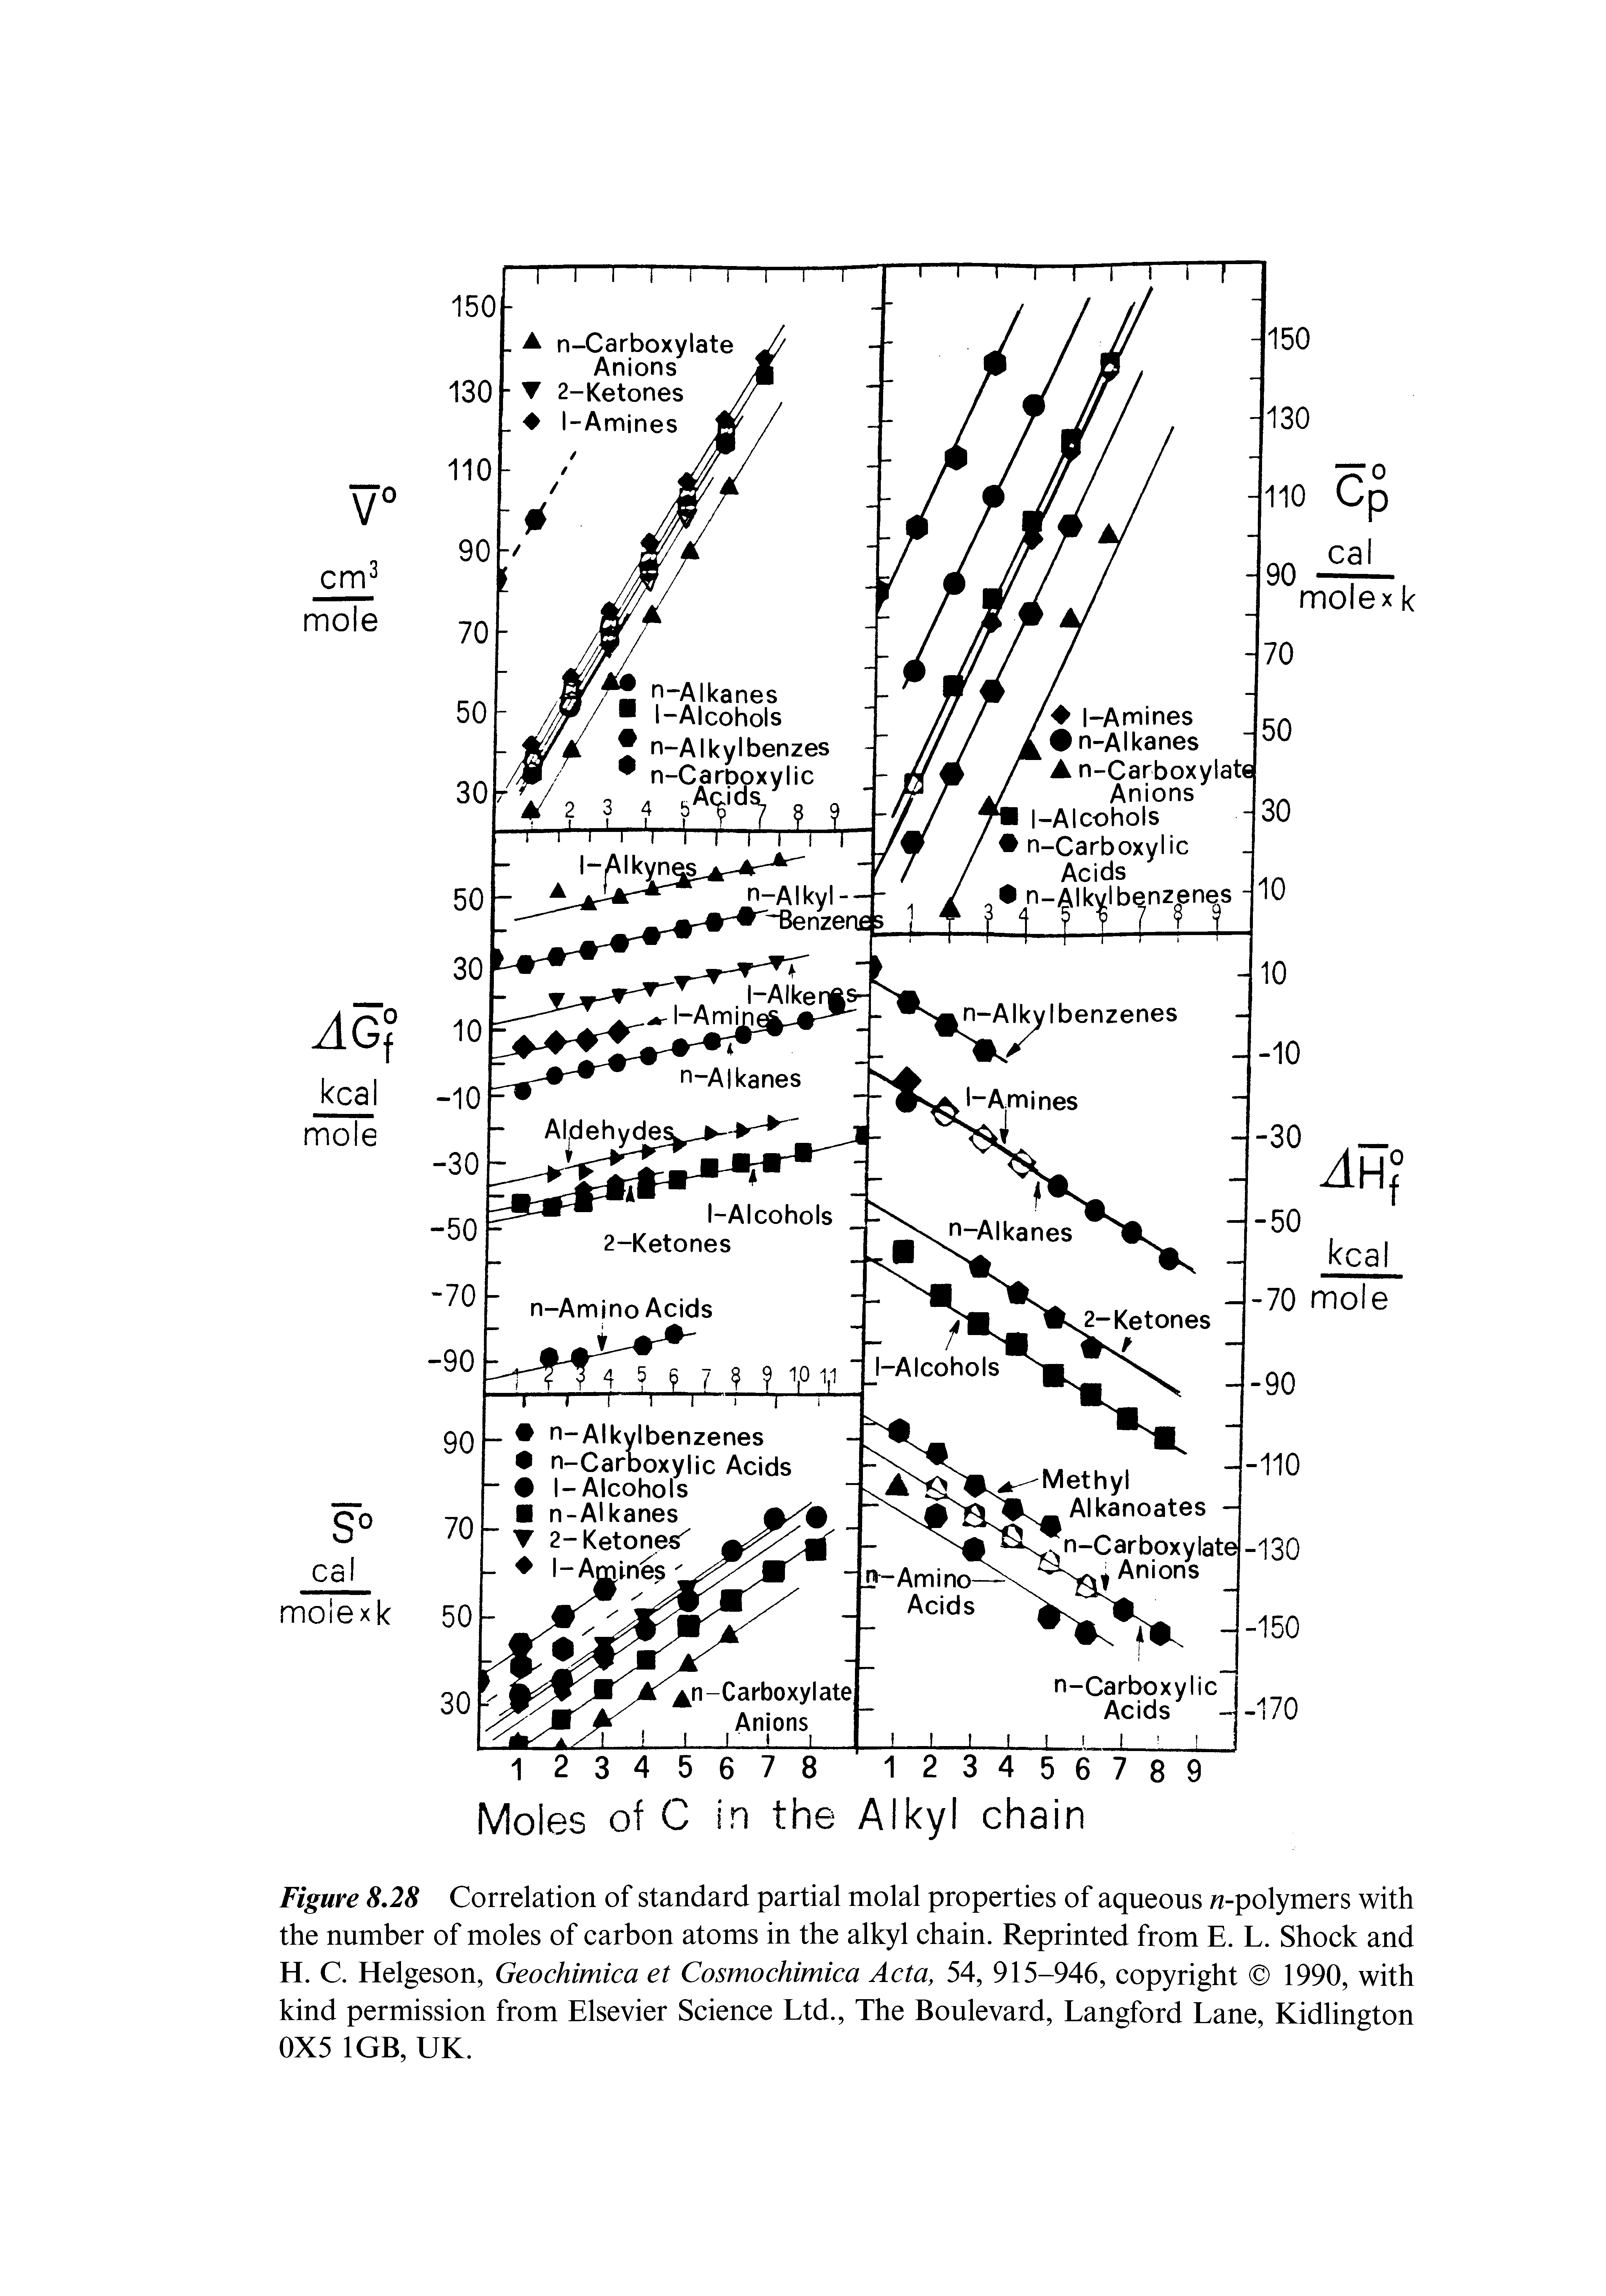 Figure 8.28 Correlation of standard partial molal properties of aqueous -polymers with the number of moles of carbon atoms in the alkyl chain. Reprinted from E. L. Shock and H. C. Helgeson, Geochimica et Cosmochimica Acta, 54, 915-946, copyright 1990, with kind permission from Elsevier Science Ltd., The Boulevard, Langford Lane, Kidlington 0X5 1GB, UK.